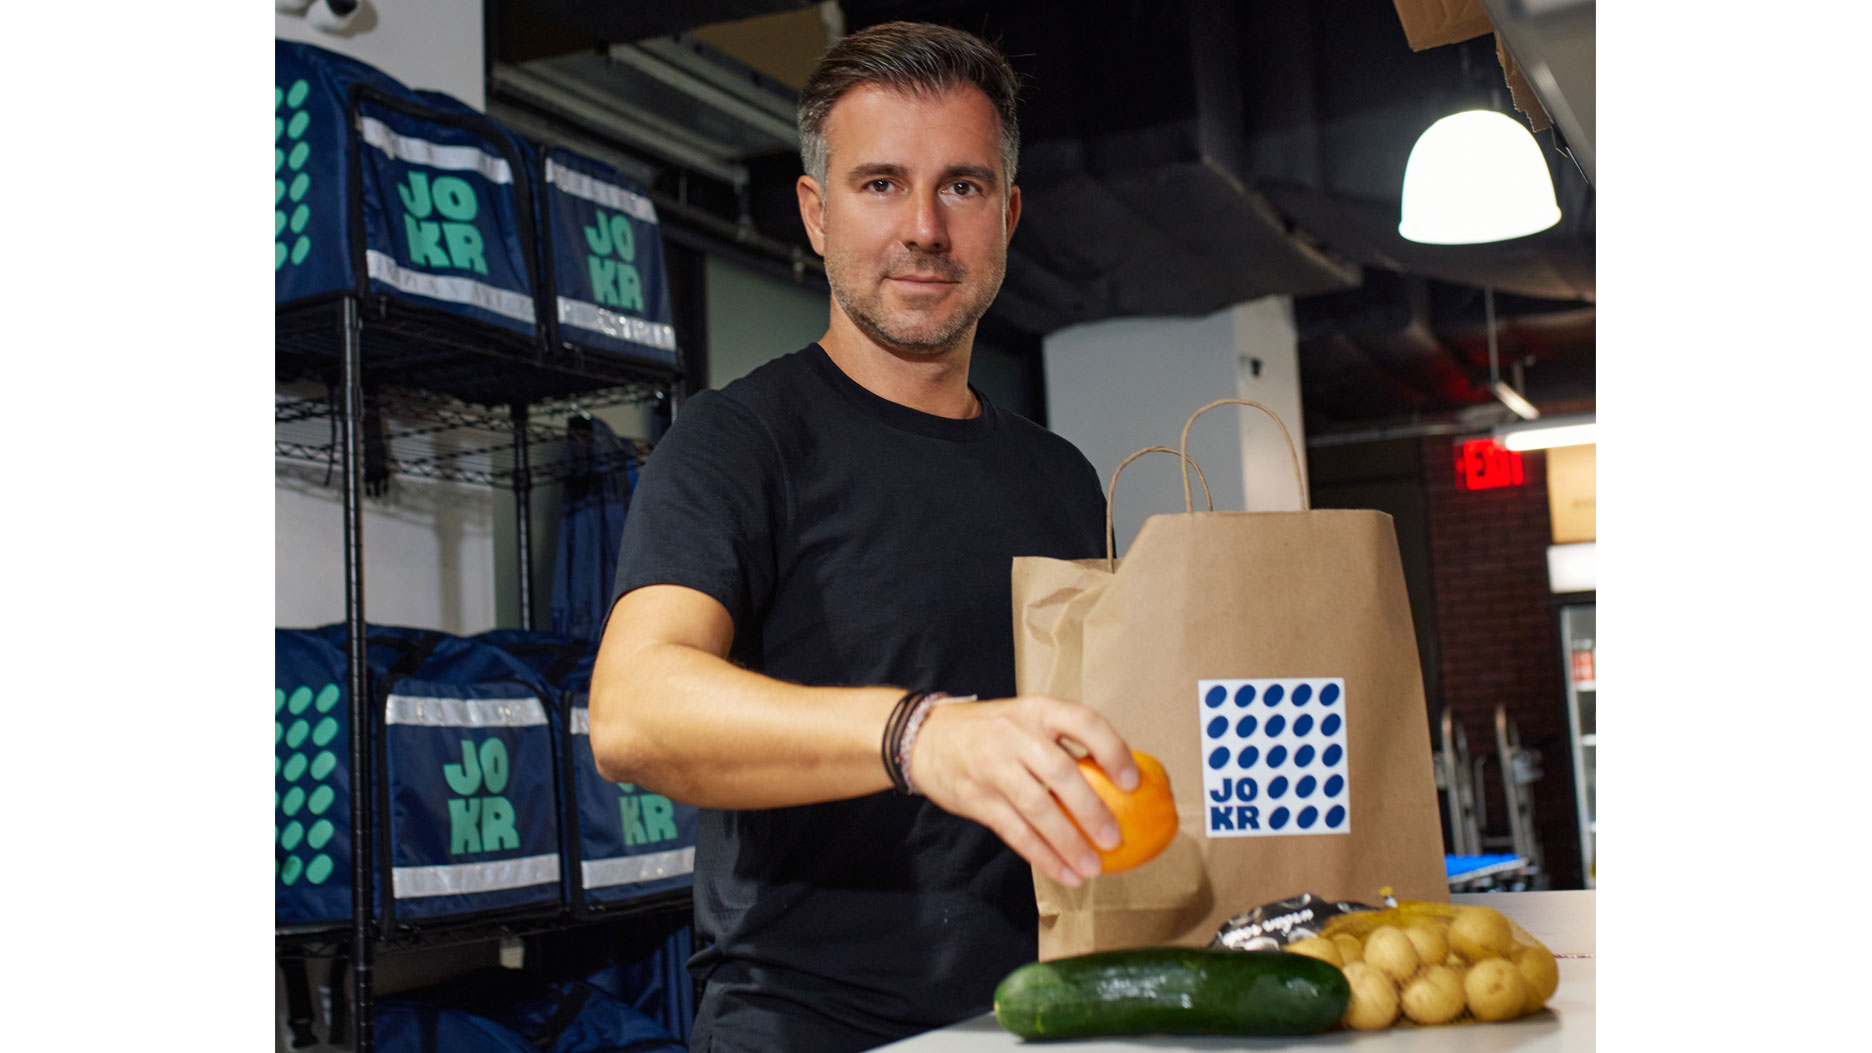 Ralf Wenzel, JOKR, grocery delivery